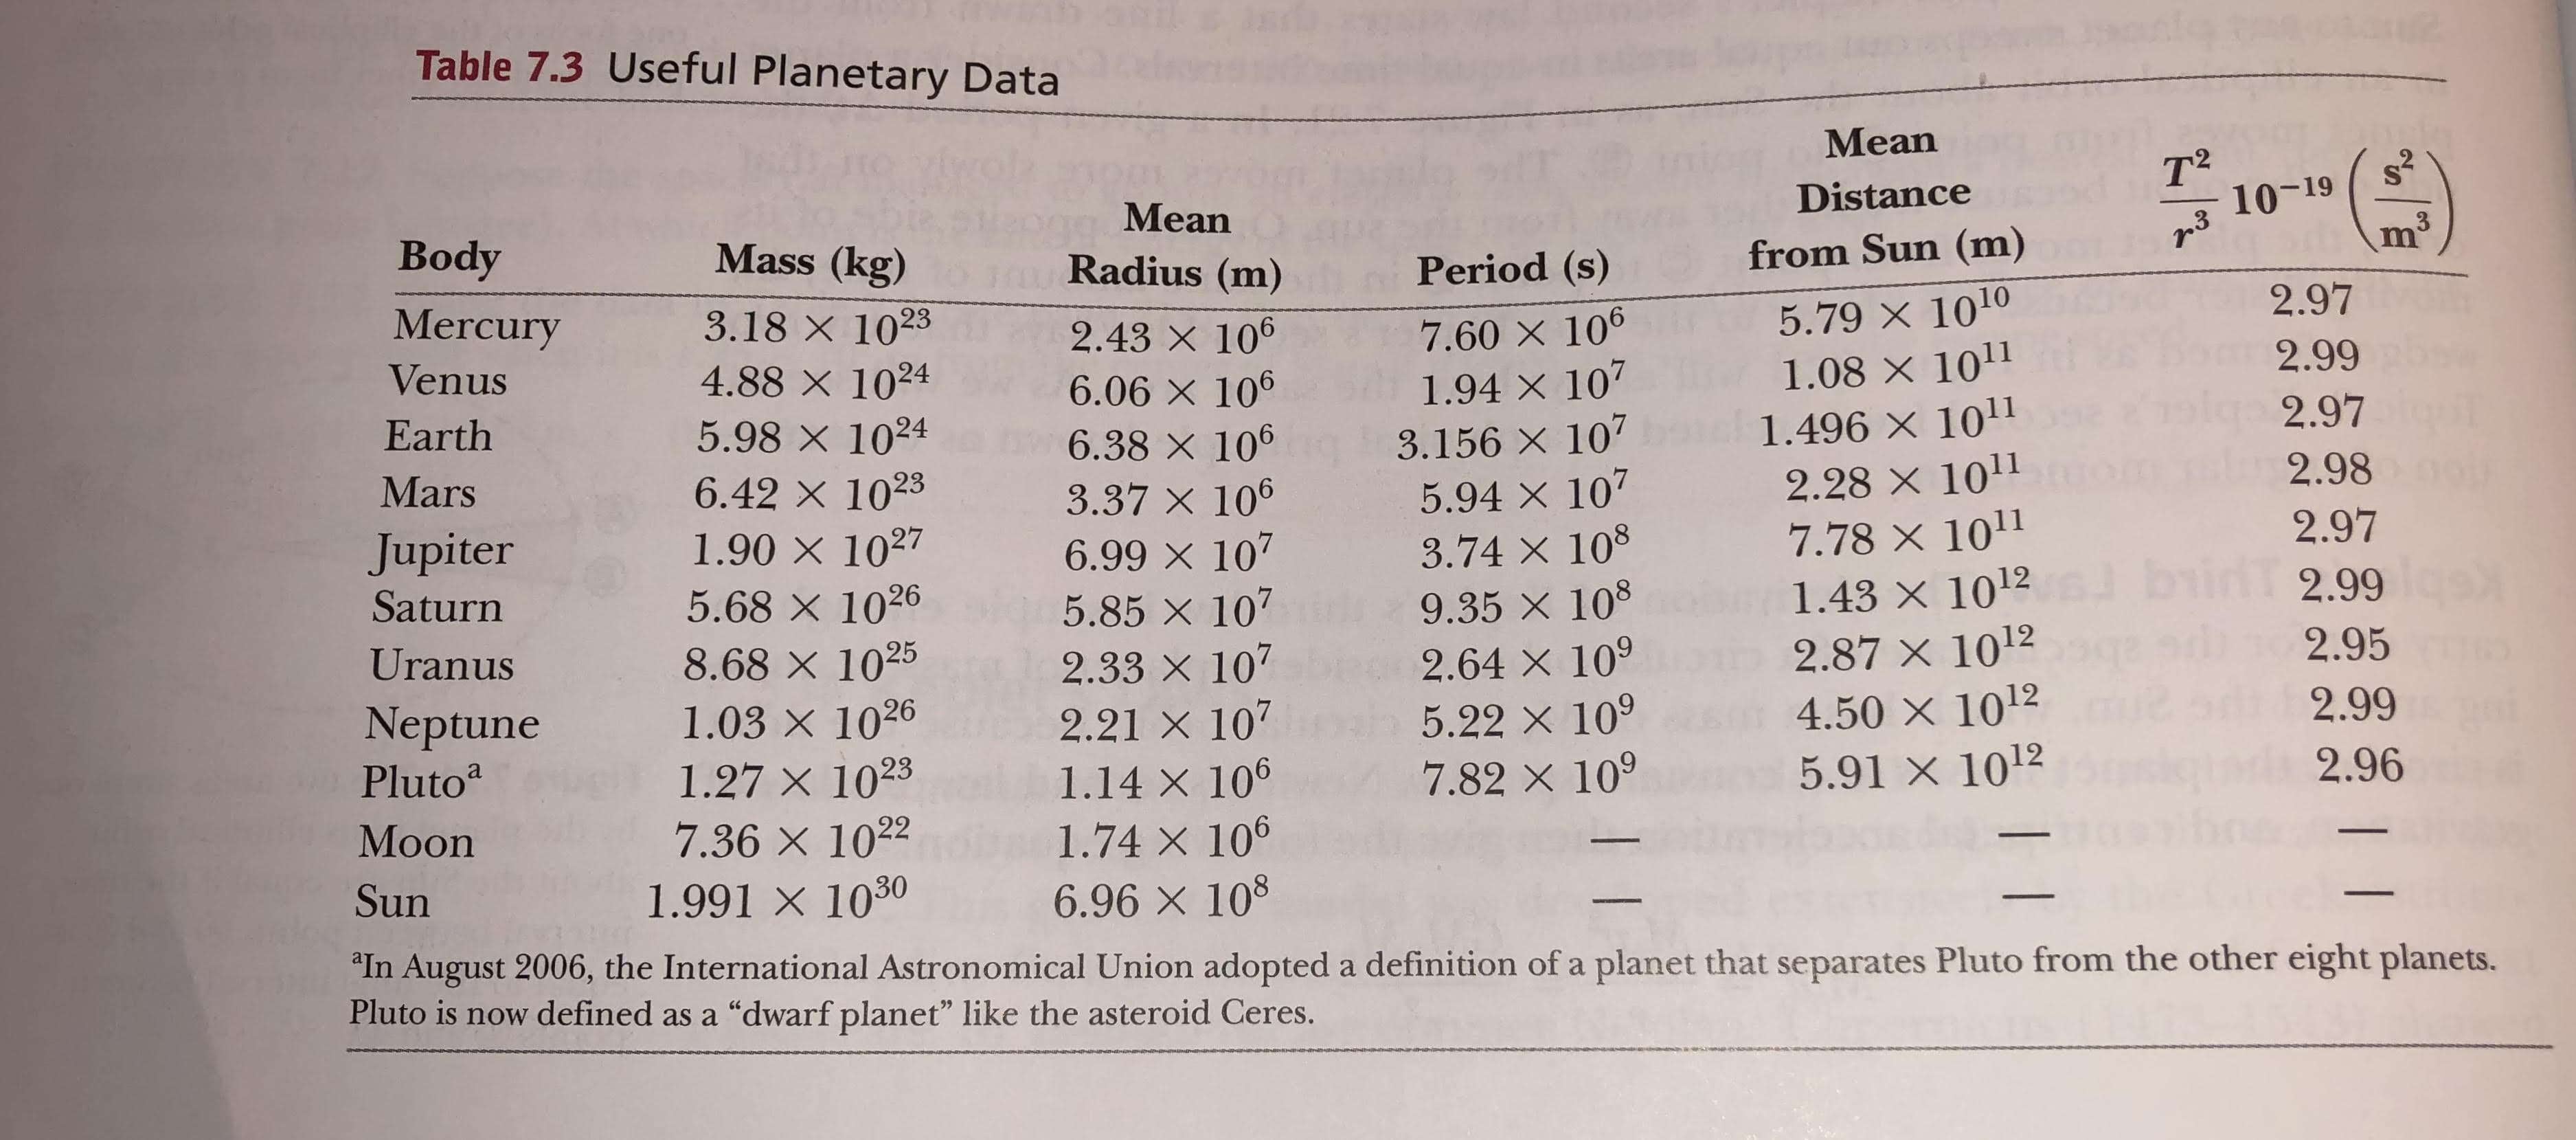 Table 7.3 Useful Planetary Data
Mean
т?
10-19
13
Distance
Mean
Body
Mass (kg)
Radius (m)
r
from Sun (m)
m
Period (s)
Mercury
3.18 X 1023
5.79 X 1010
1.08 X 1011
1.496 X 1011
2.28 X 1011
7.78 X 1011
1.43 X 1012
2.87 x 1012
4.50 x 1012
5.91 X 1012
2.97
7.60 X 106
1.94 X 107
2.43 X 106
6.06 X 106
Venus
4.88 X 1024
5.98 X 1024
6.42 X 1023
1.90 X 1027
5.68 X 1026
2.99
Earth
2.97
6.38 X 100
3.37 X 106
6.99 X 107
5.85 X 107
2.33 x 107
2.21 x 107
1.14 X 106
1.74 X 100
3.156 X 107
5.94 X 107
3.74 X 108
9.35 X 108
2.64 X 109
5.22 X 109
7.82 X 109
Mars
2.98
Jupiter
2.97
Saturn
2.99
Uranus
8.68 X 1025
1.03 x 1026
2.95
Neptune
2.99
Pluto2
1.27 X 1023
7.36 X 1022
1.991 X 1030
2.96
Мoon
Sun
6.96 X 108
"In August 2006, the International Astronomical Union adopted a definition of a planet that separates Pluto from the other eight planets.
Pluto is now defined as a "dwarf planet" like the asteroid Ceres.
